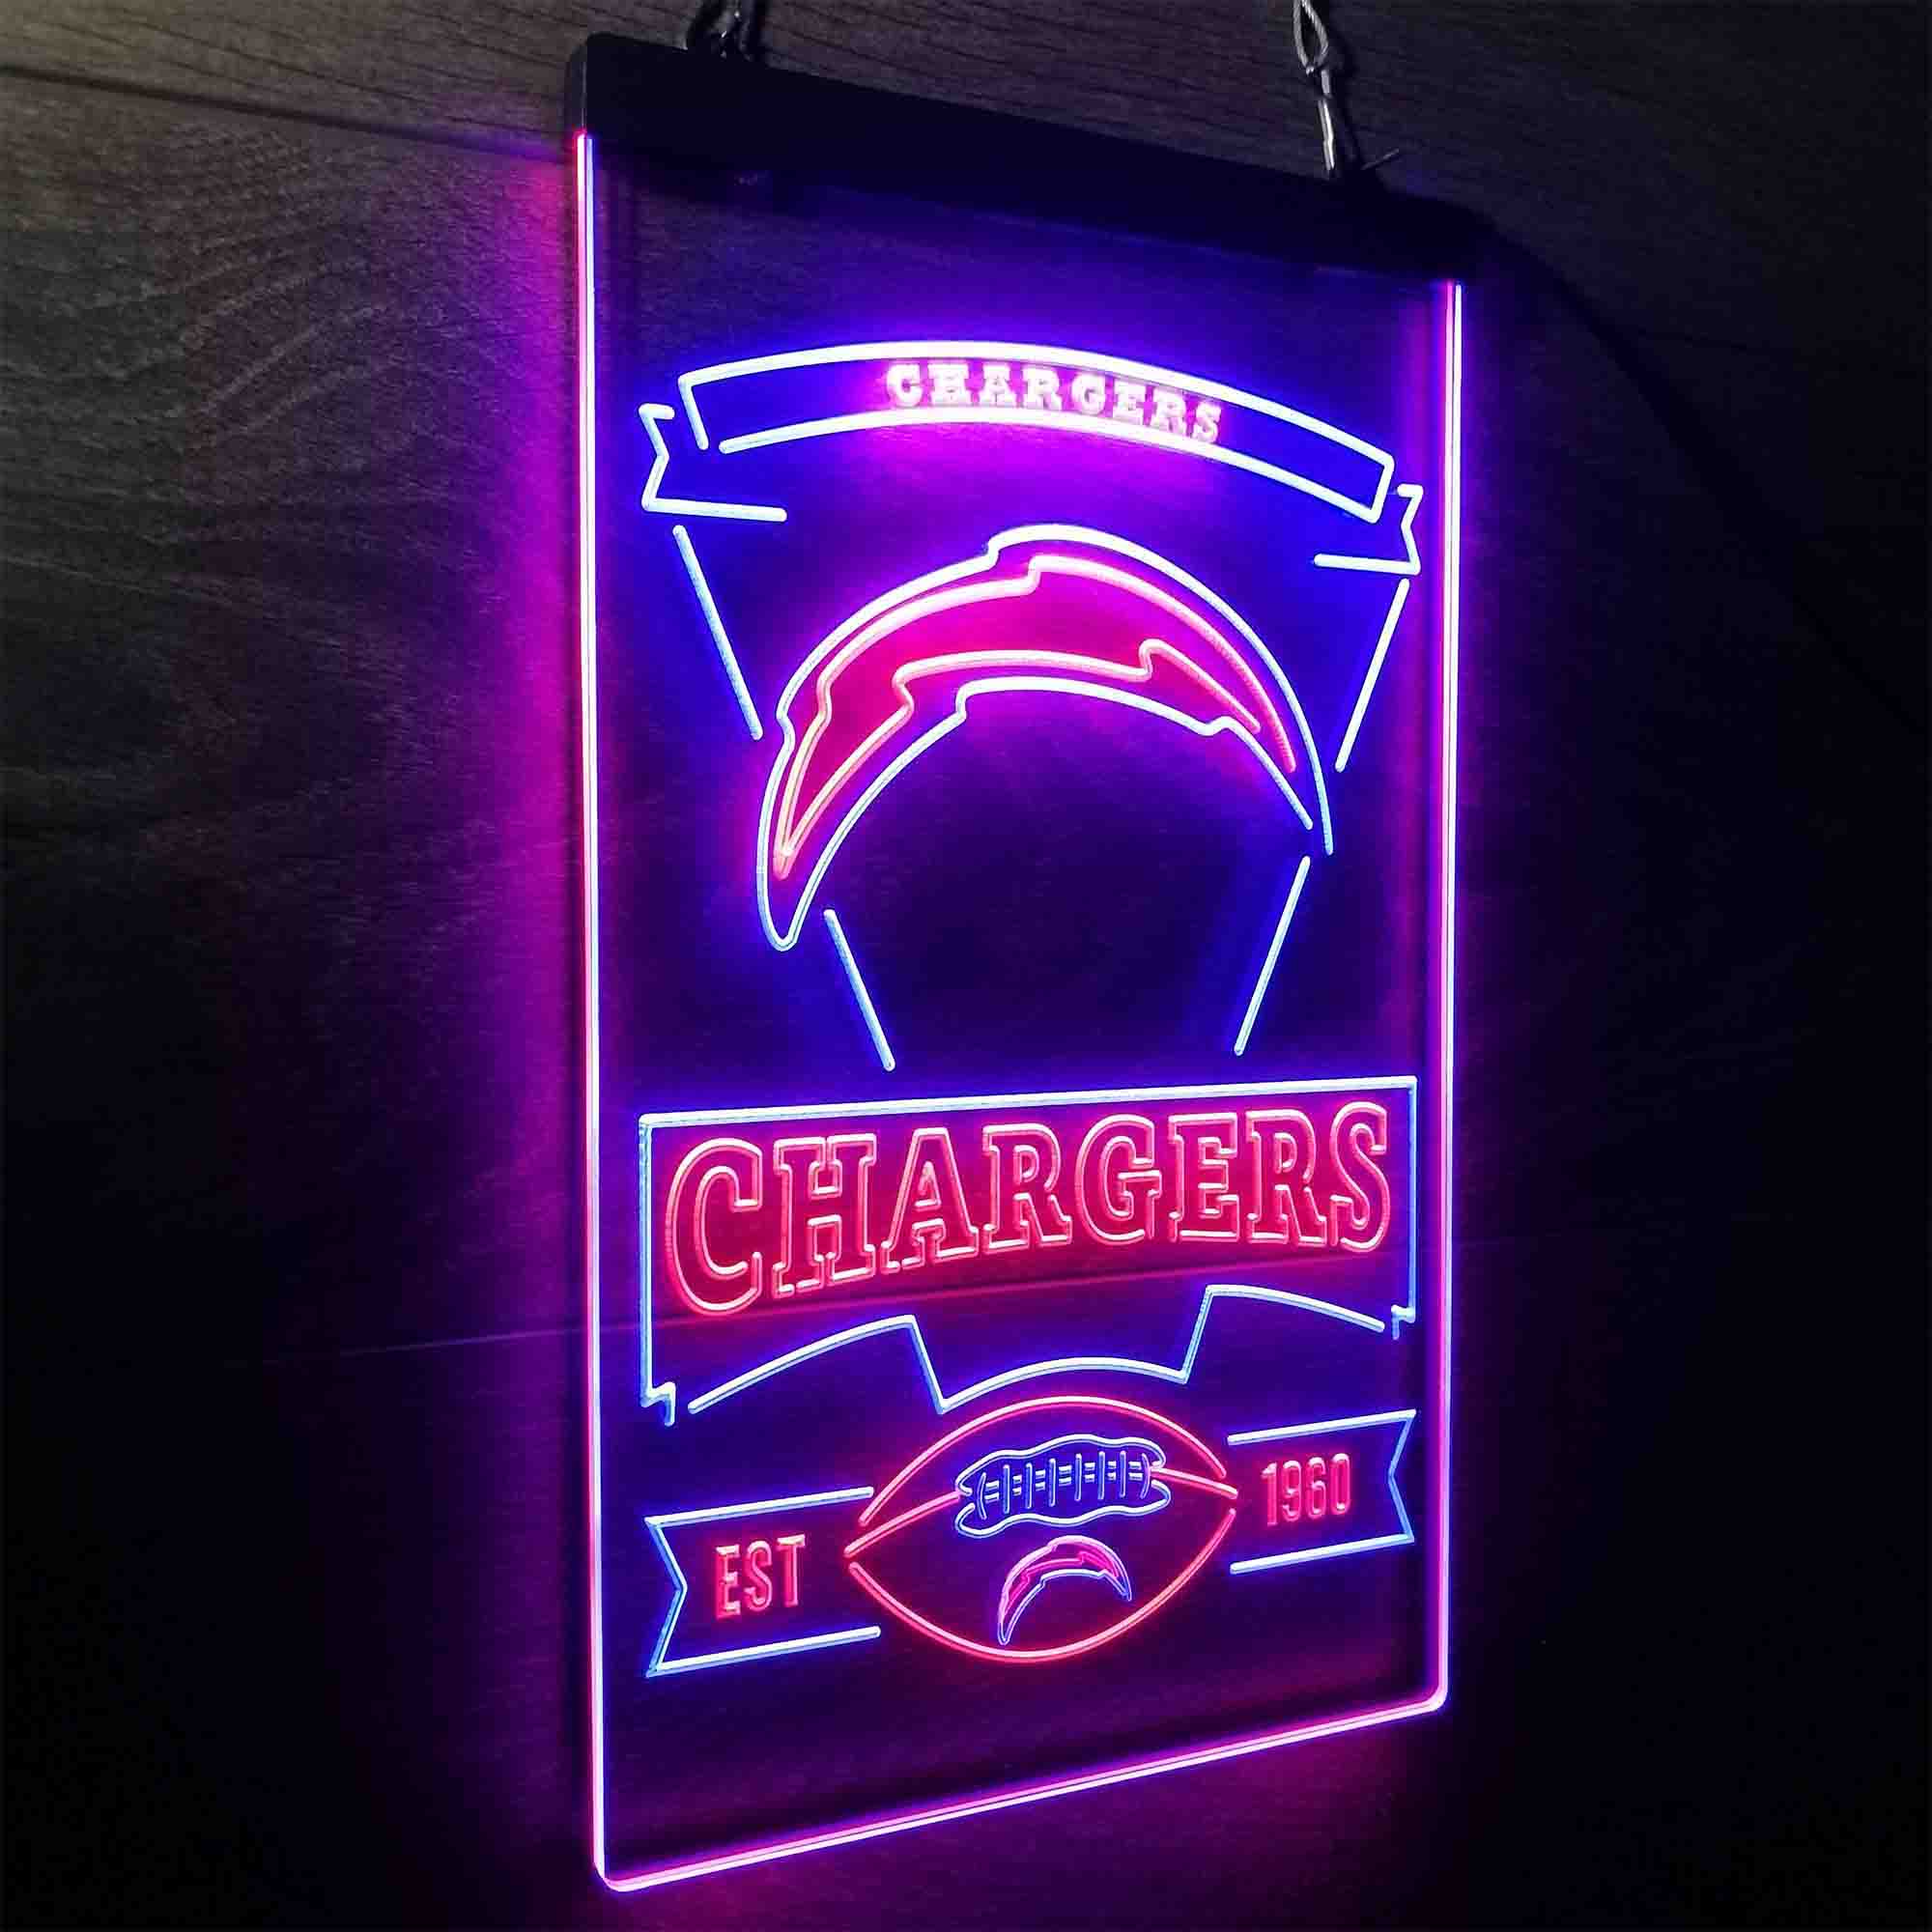 Los Angeles Chargers Est. 1960 Neon-Like LED Sign